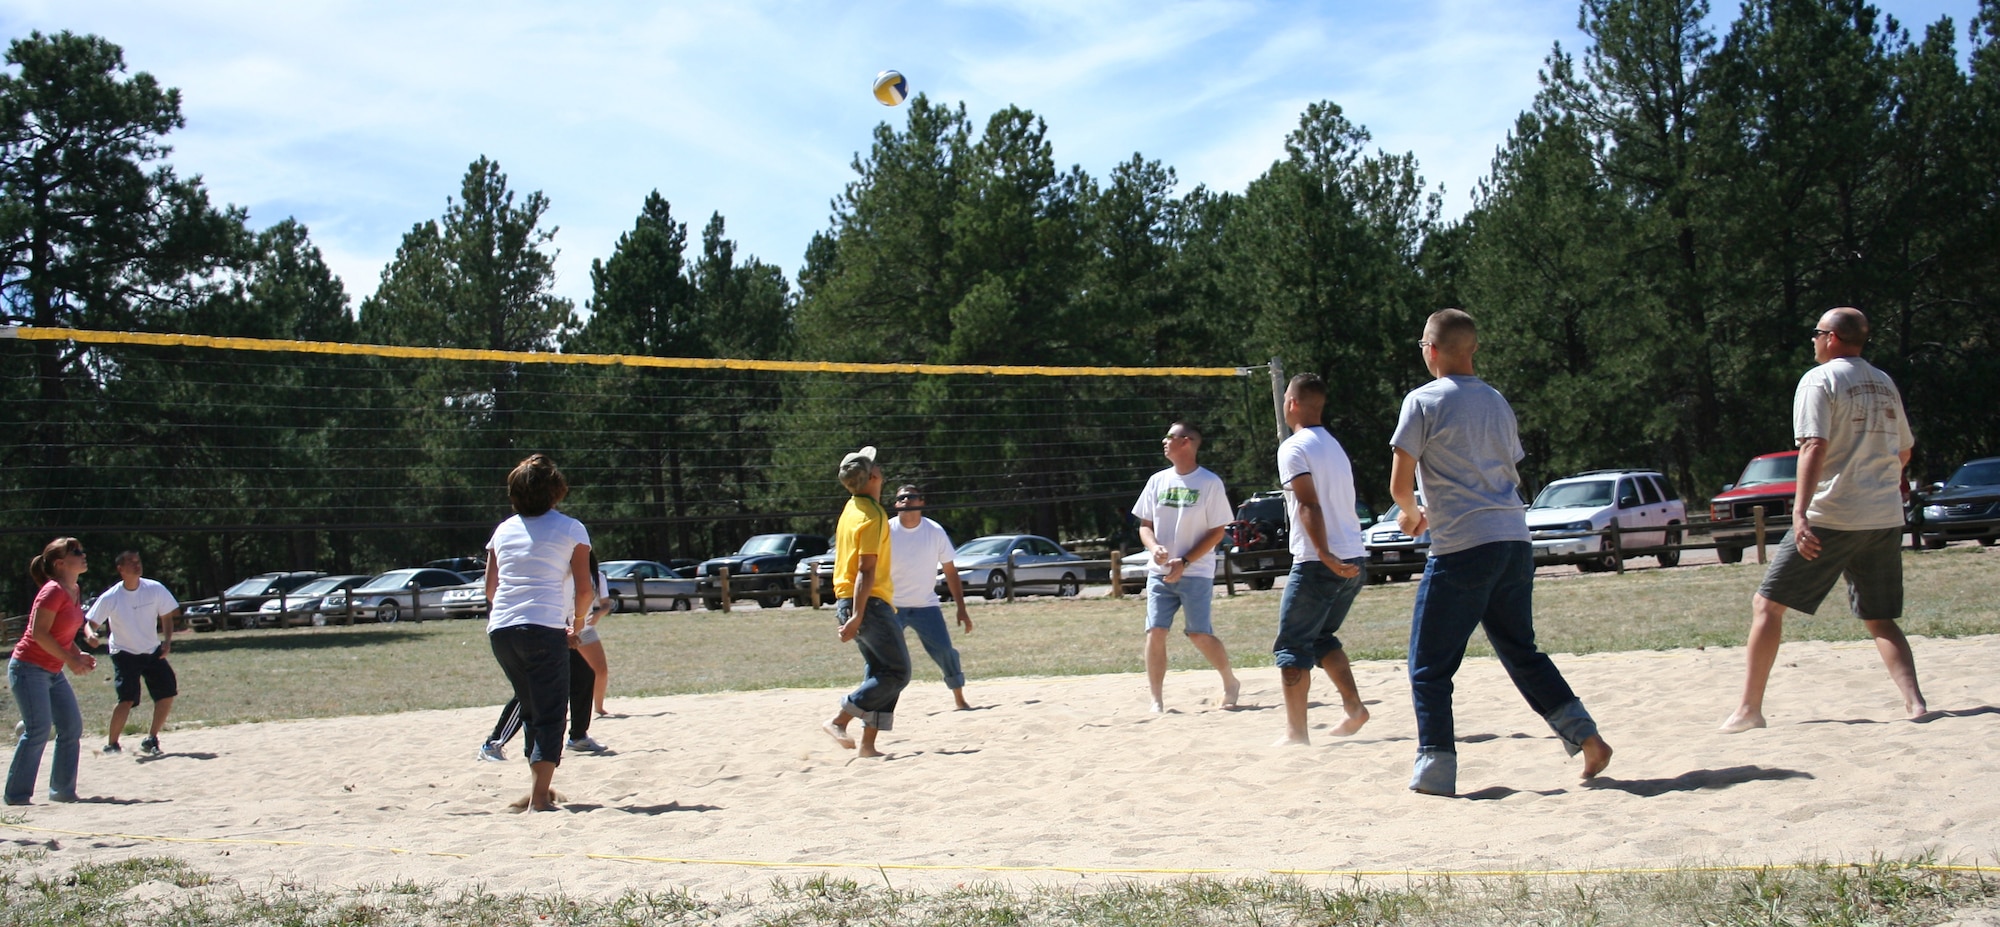 Squadrons from the 310th Space Wing played in a single-round elimination volleyball tournament Sept. 12, at the southern units family day picnic. Airmen and their families also participated in a water balloon toss, egg races and played other games throughout the picnic at the U.S. Air Force Academy?s FamCamp. (U.S. Air Force Photo/ Staff Sgt. Desiree Economides)